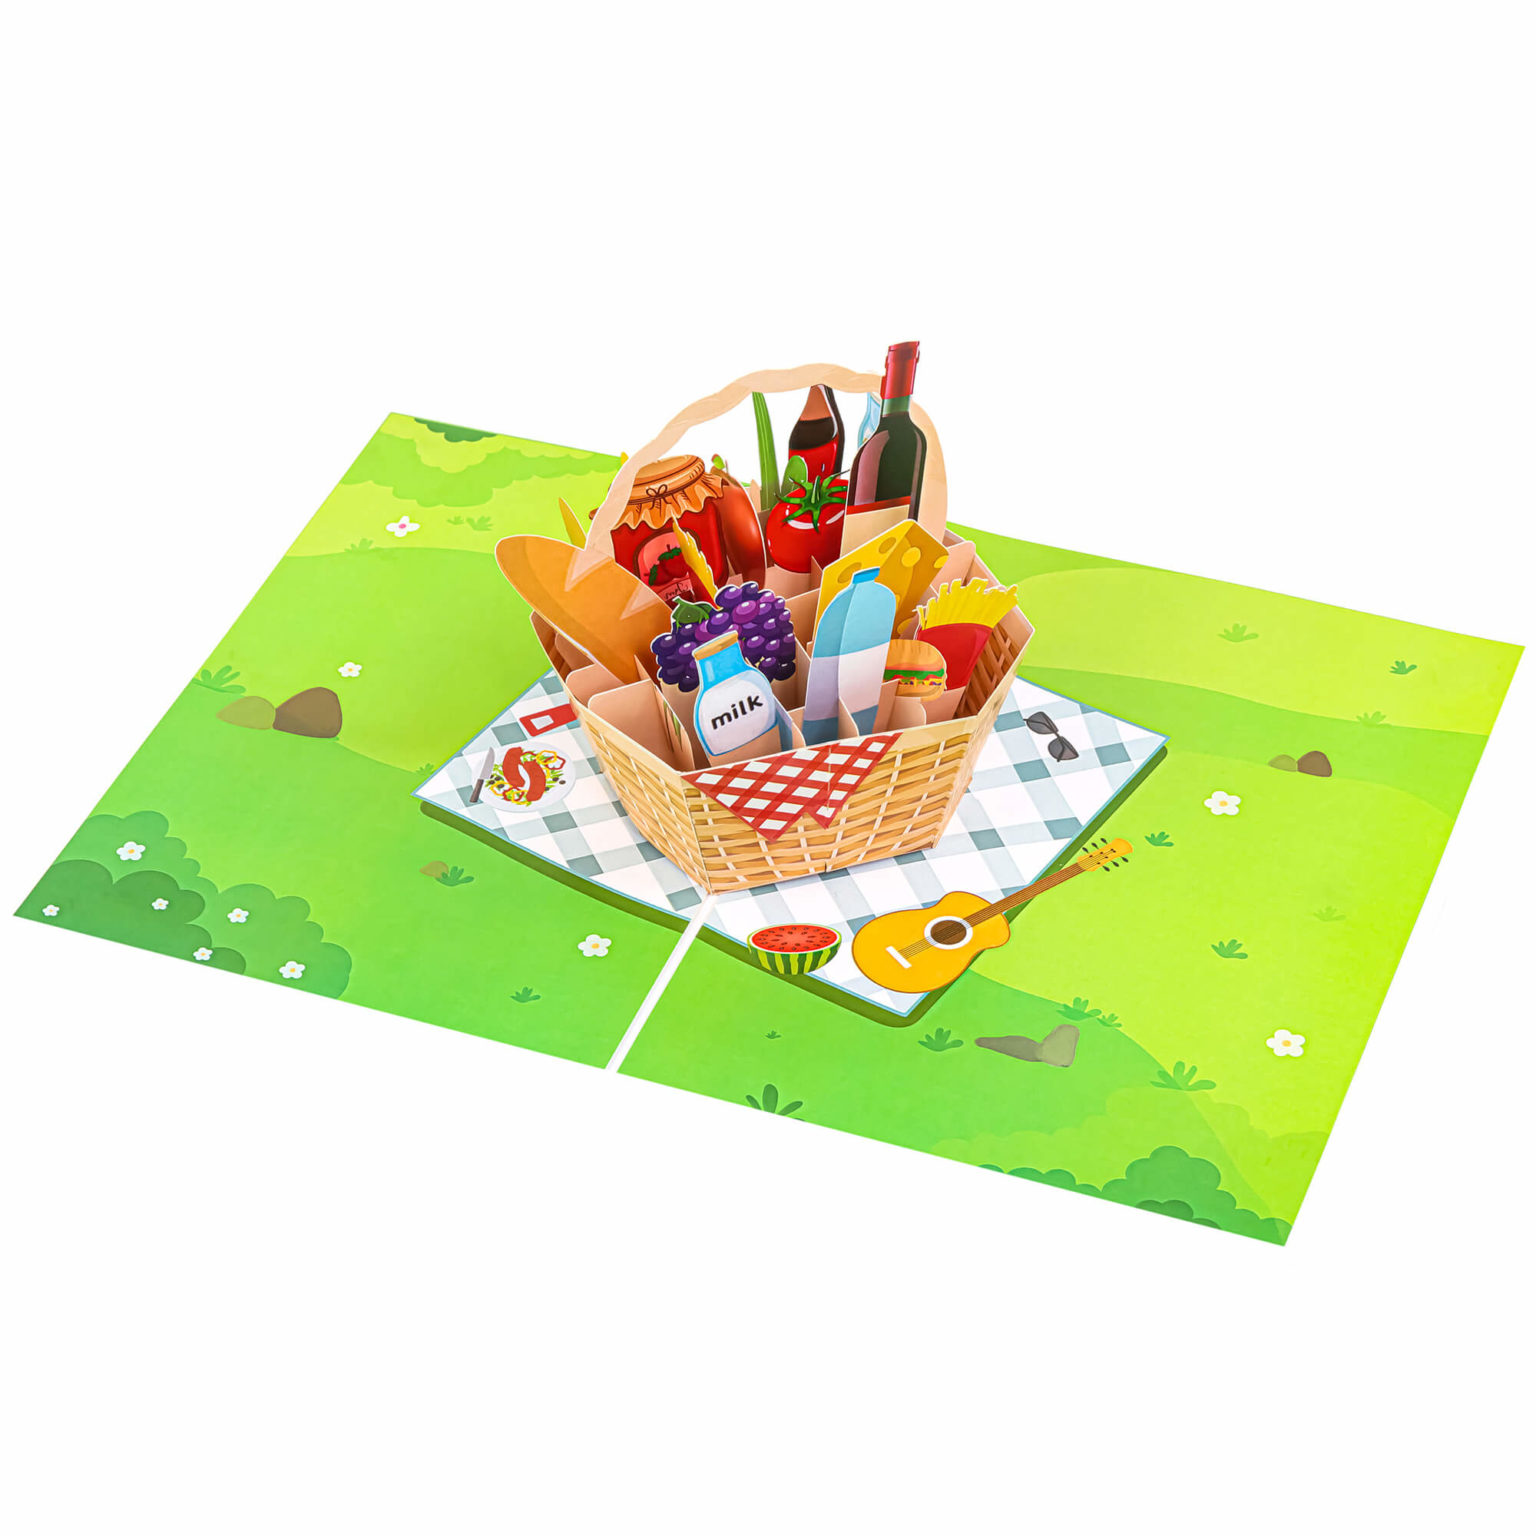 Picnic-Pop-Up-Card-overview-wholesale-manufacture-custom-design-mothers-day-card-fathers-day-pop-up-card-custom-birthday-cards